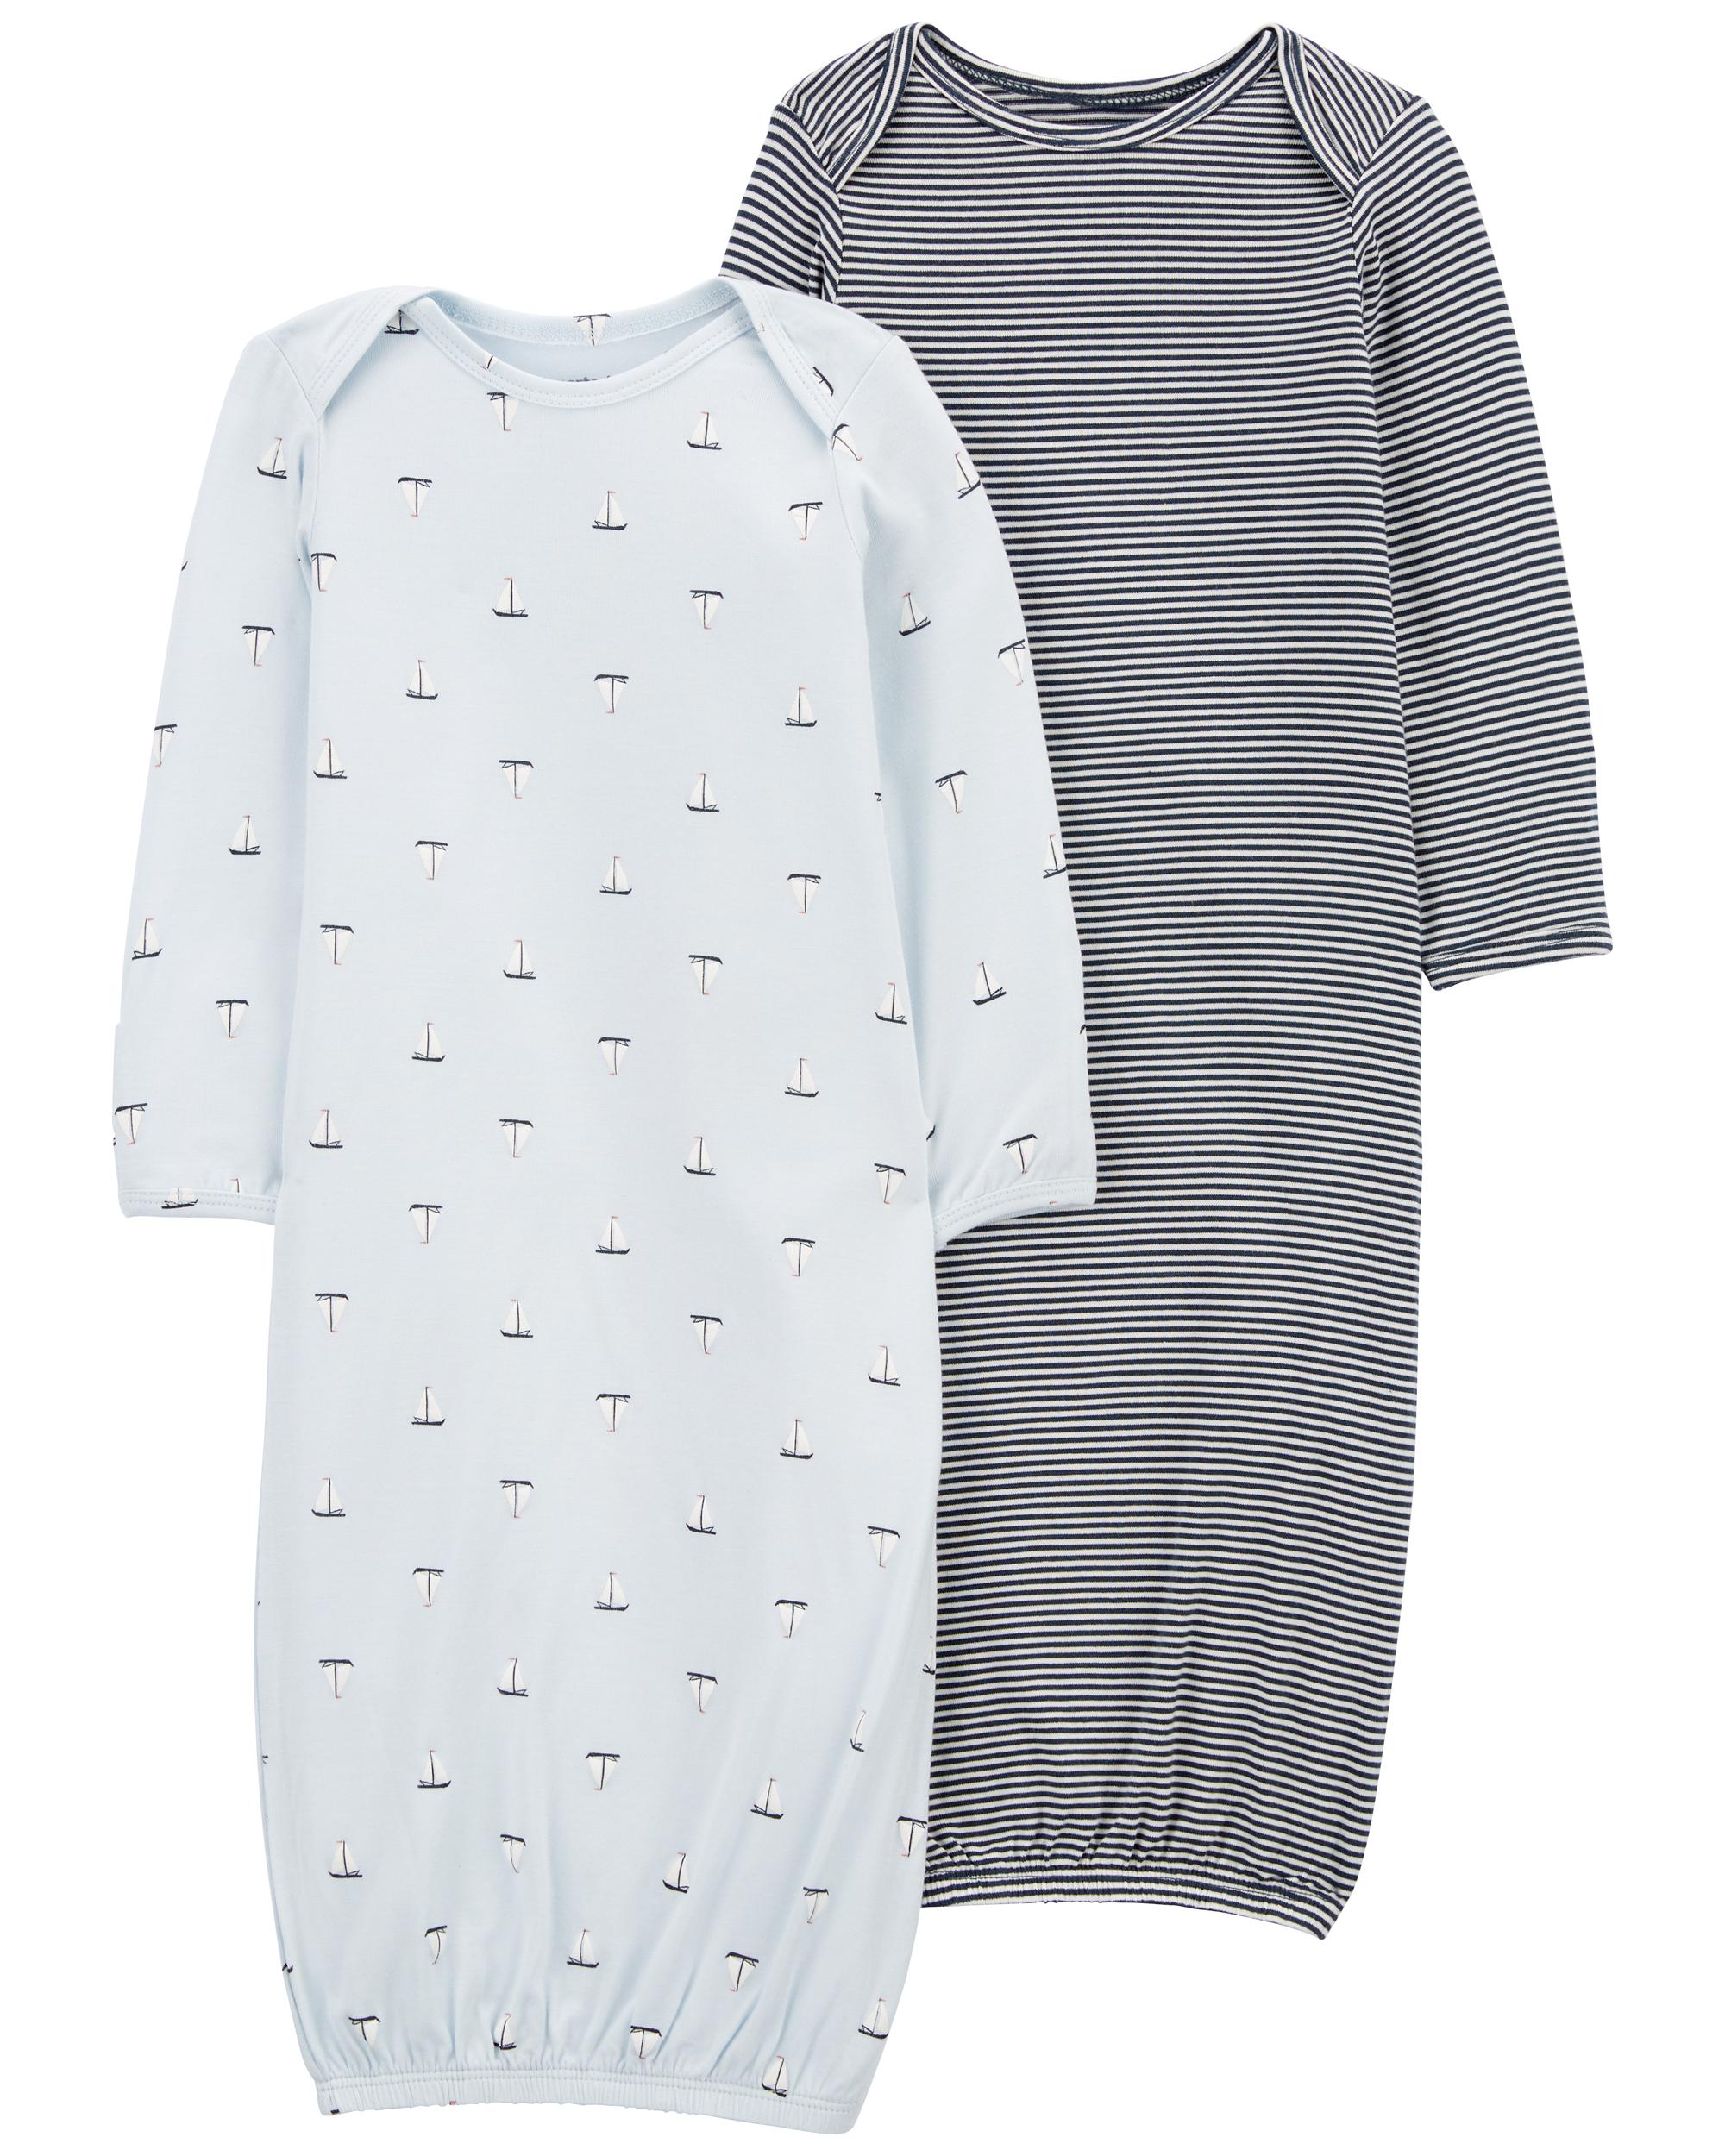 Carter's Baby 2-Pack Sleeper Gowns in Neutral